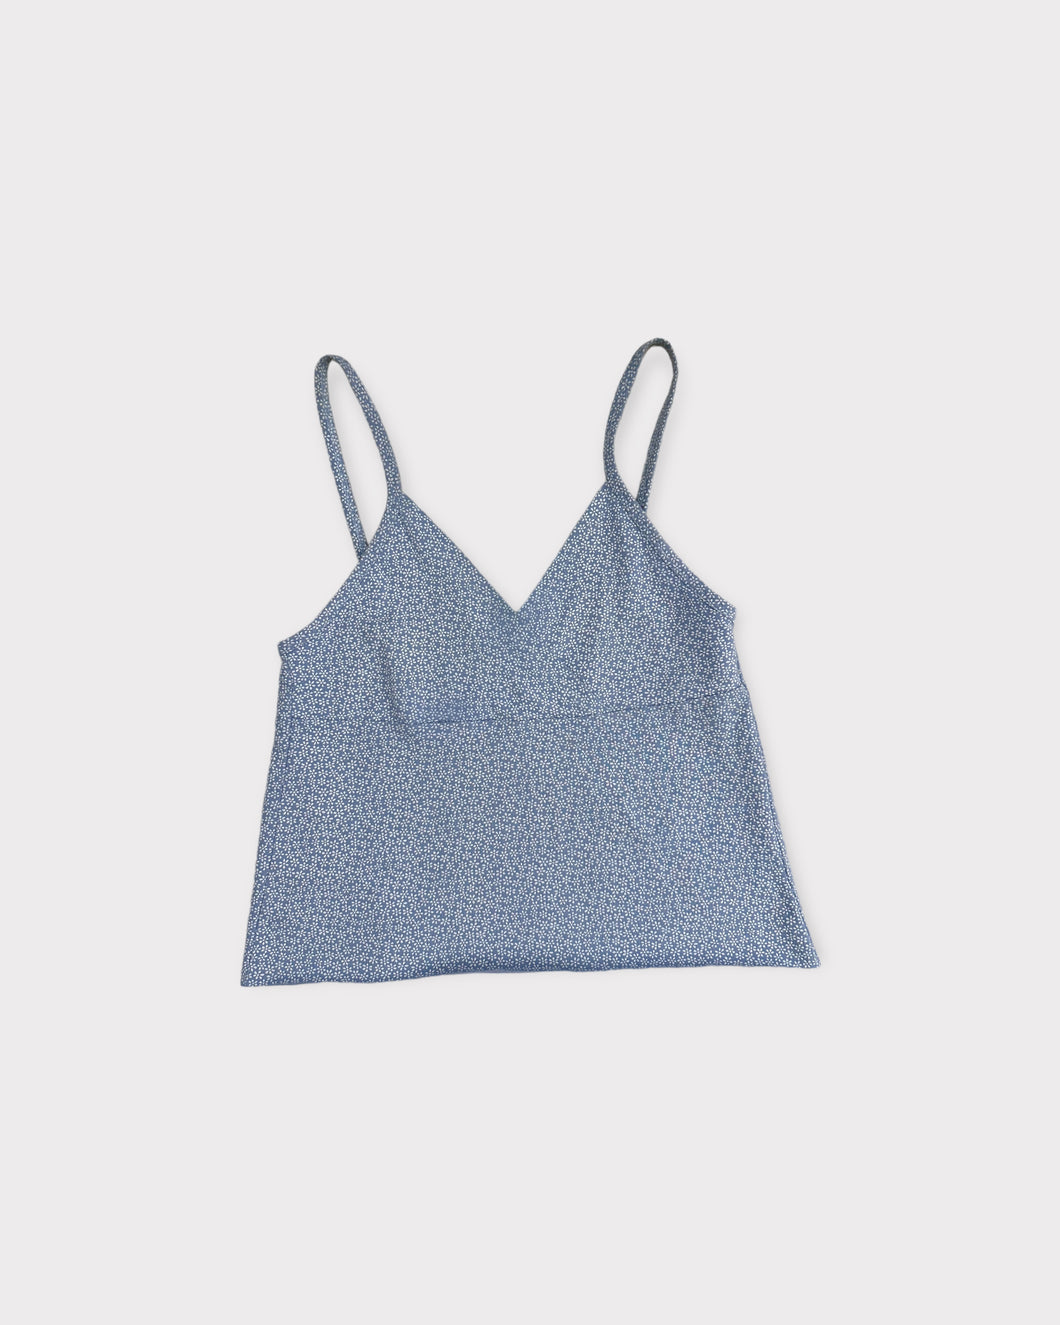 BRANDY MELVILLE LIGHT Blue Tank Top Crop Details One Size Ribbed